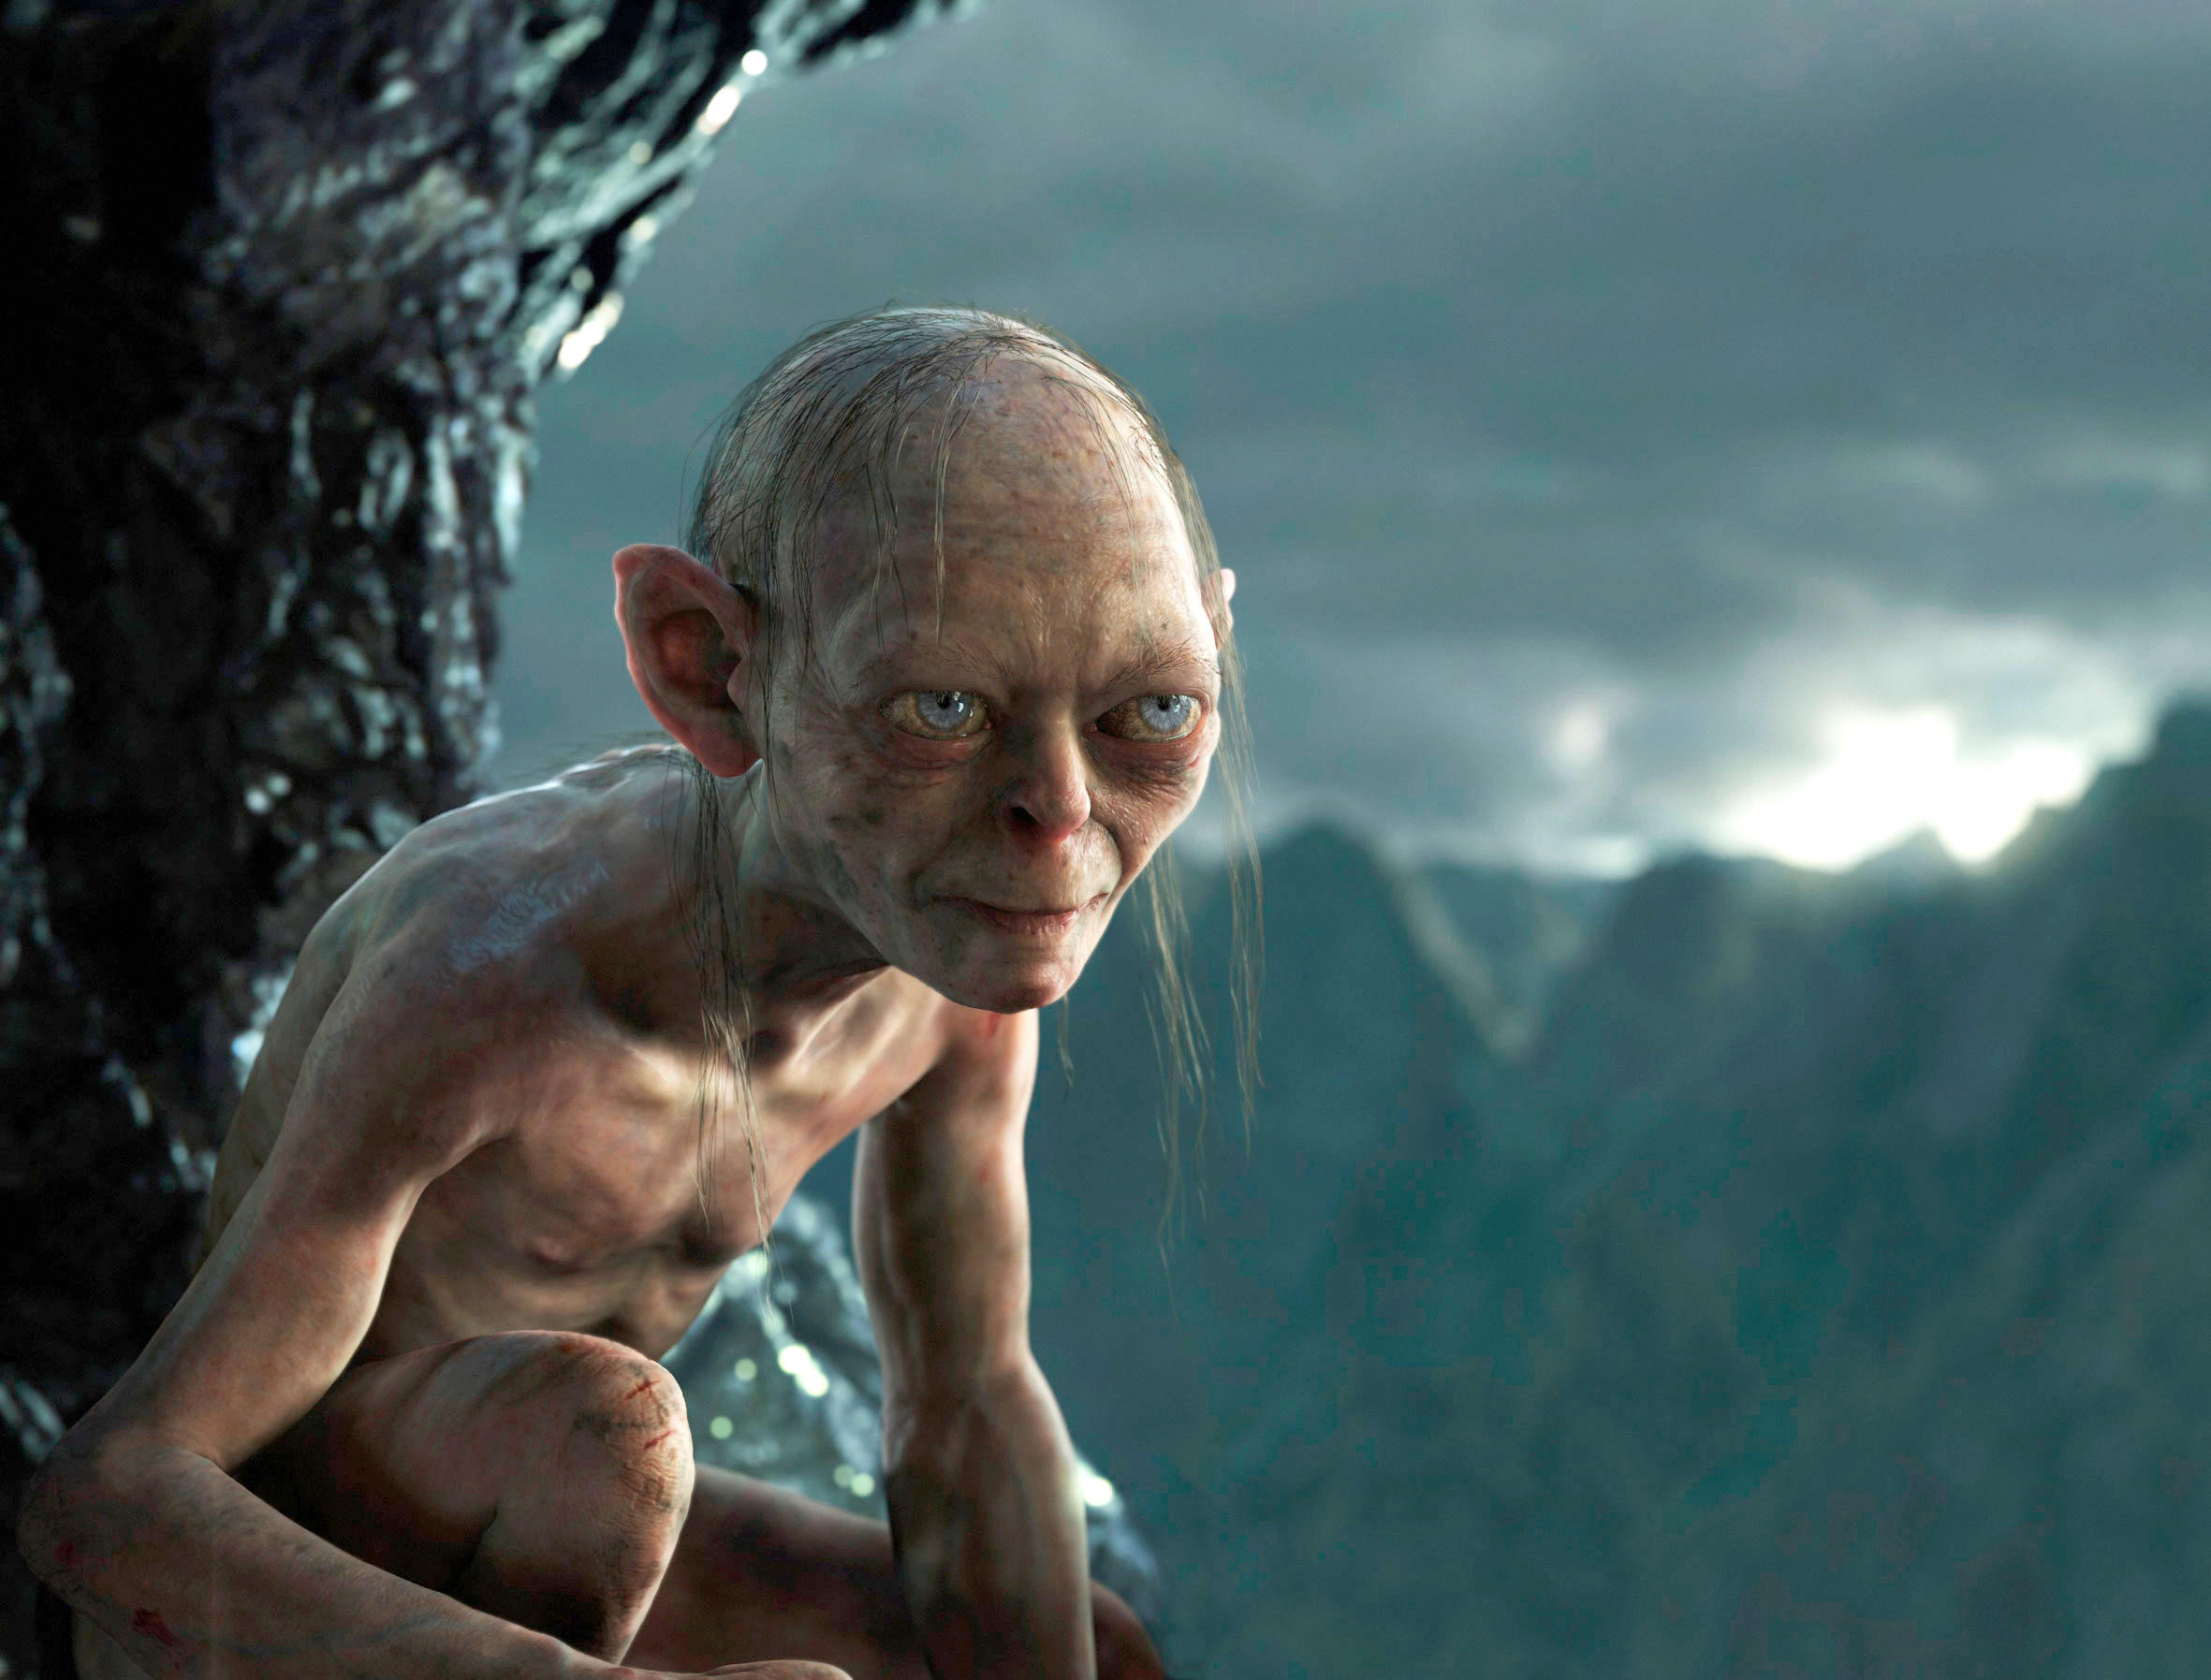 Andy Serkis will reprise his role as the voice of Gollum (pictured) in the new film